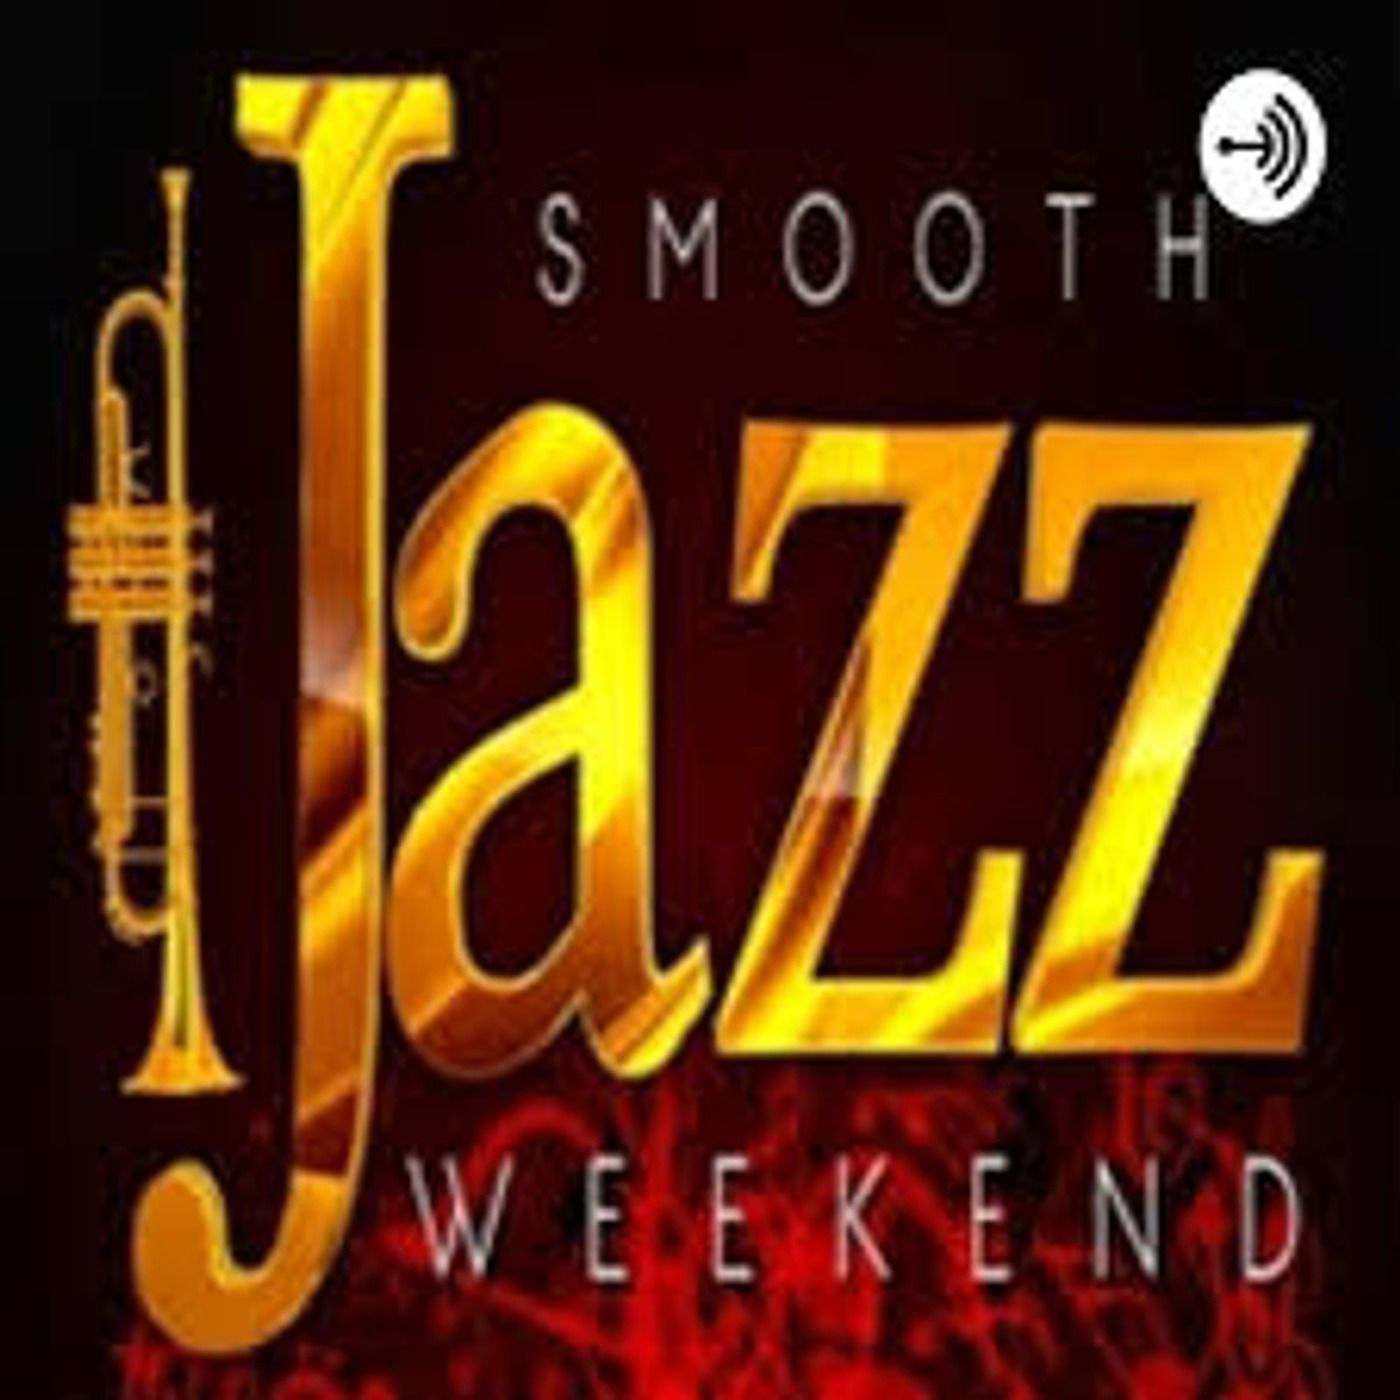 A highlight from Smooth Jazz Weekend with Tina E. (I'm Every Woman)